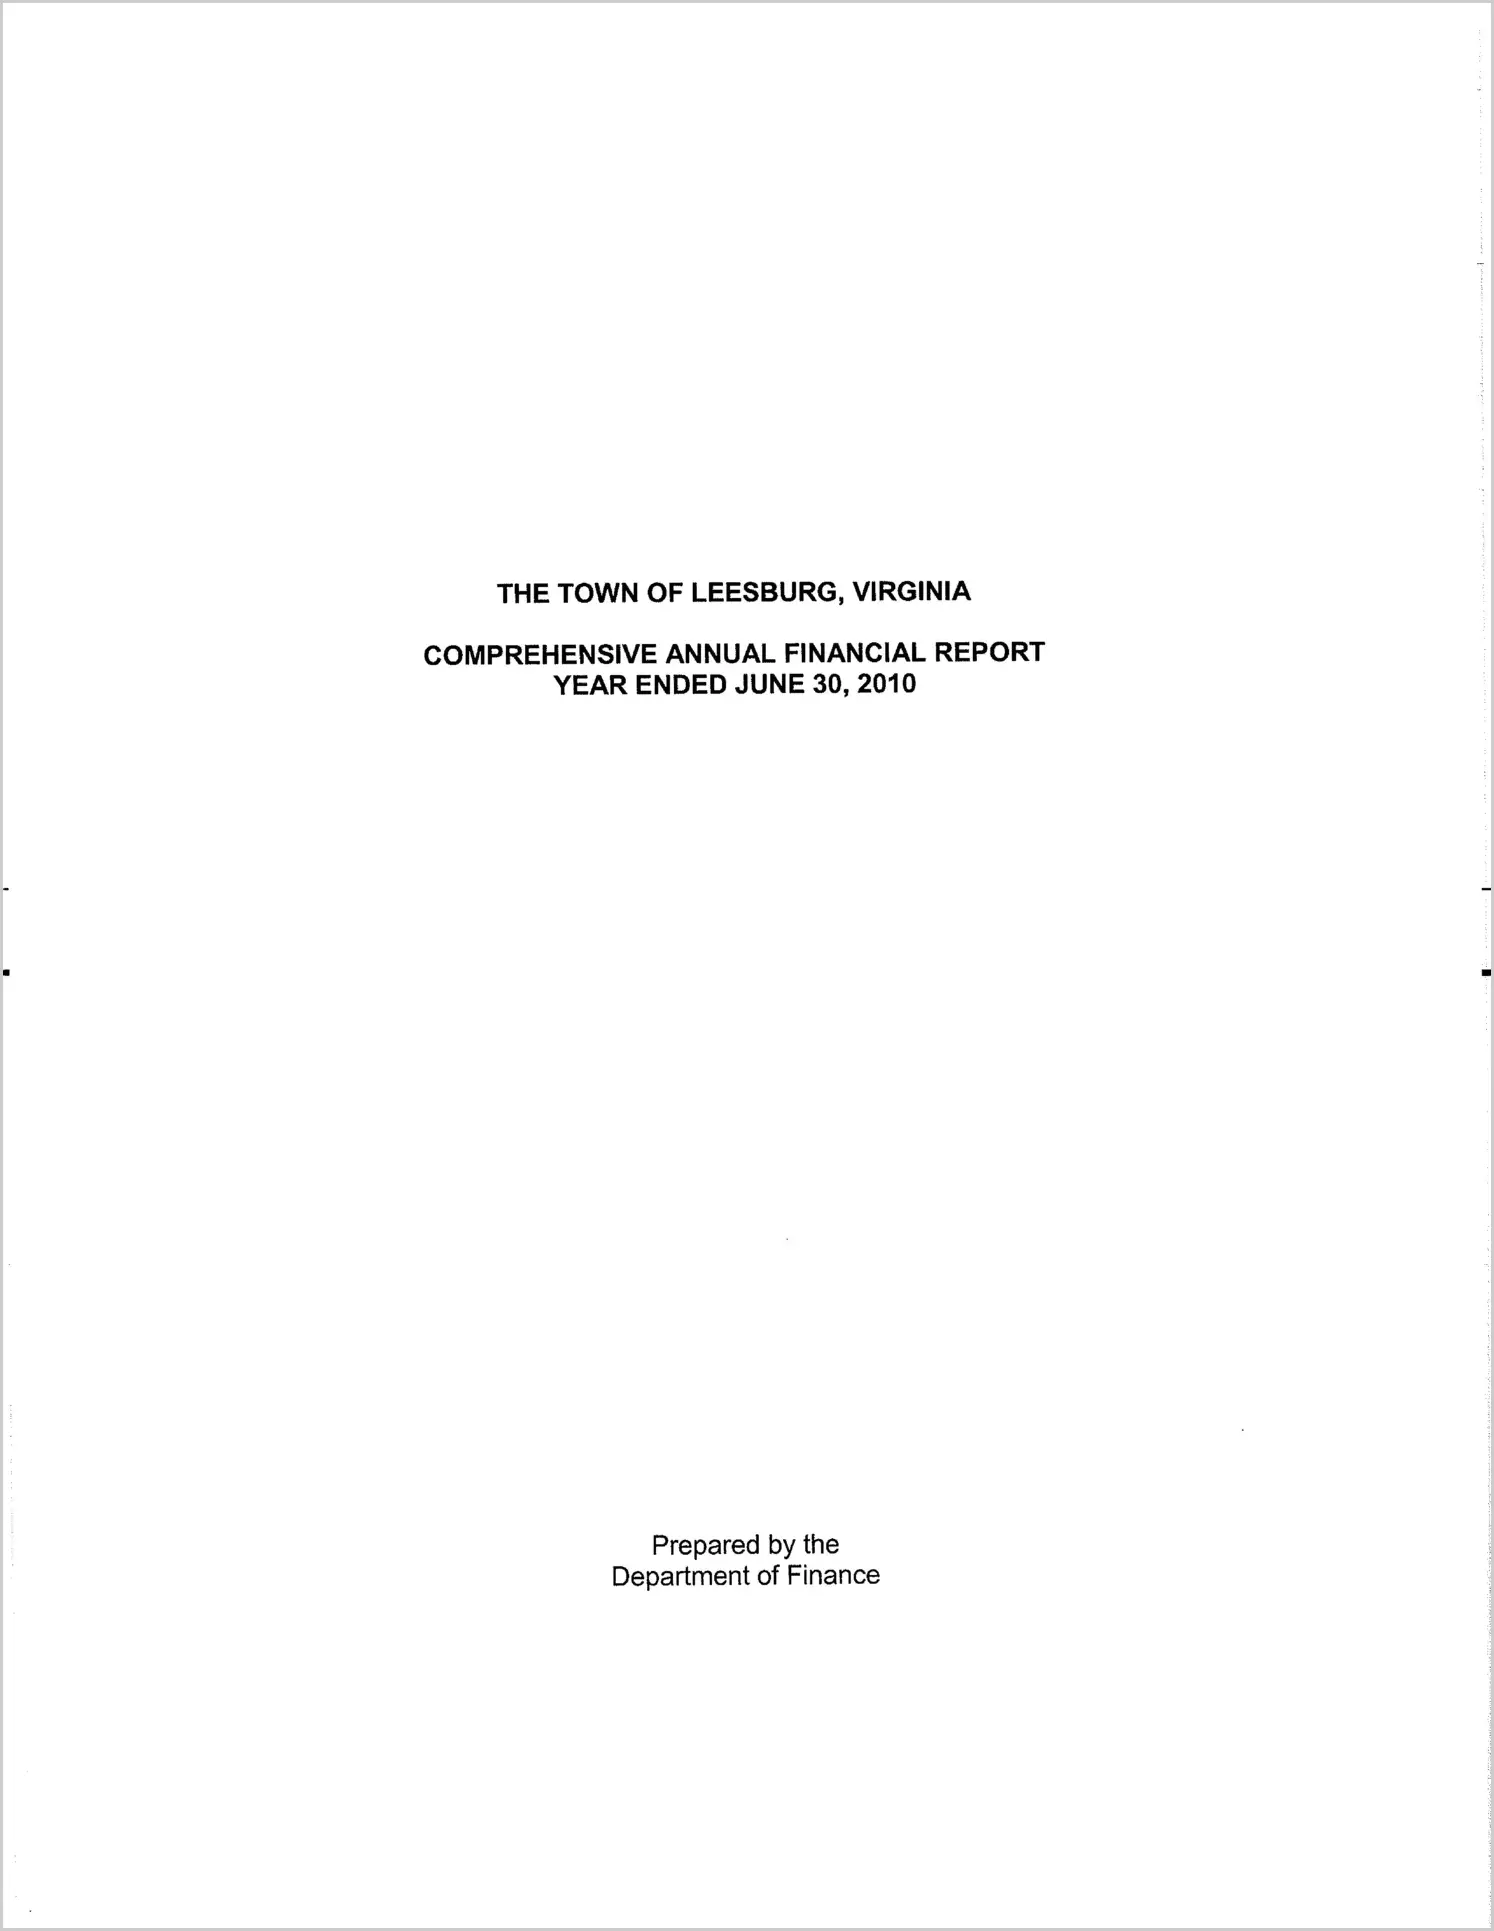 2010 Annual Financial Report for Town of Leesburg